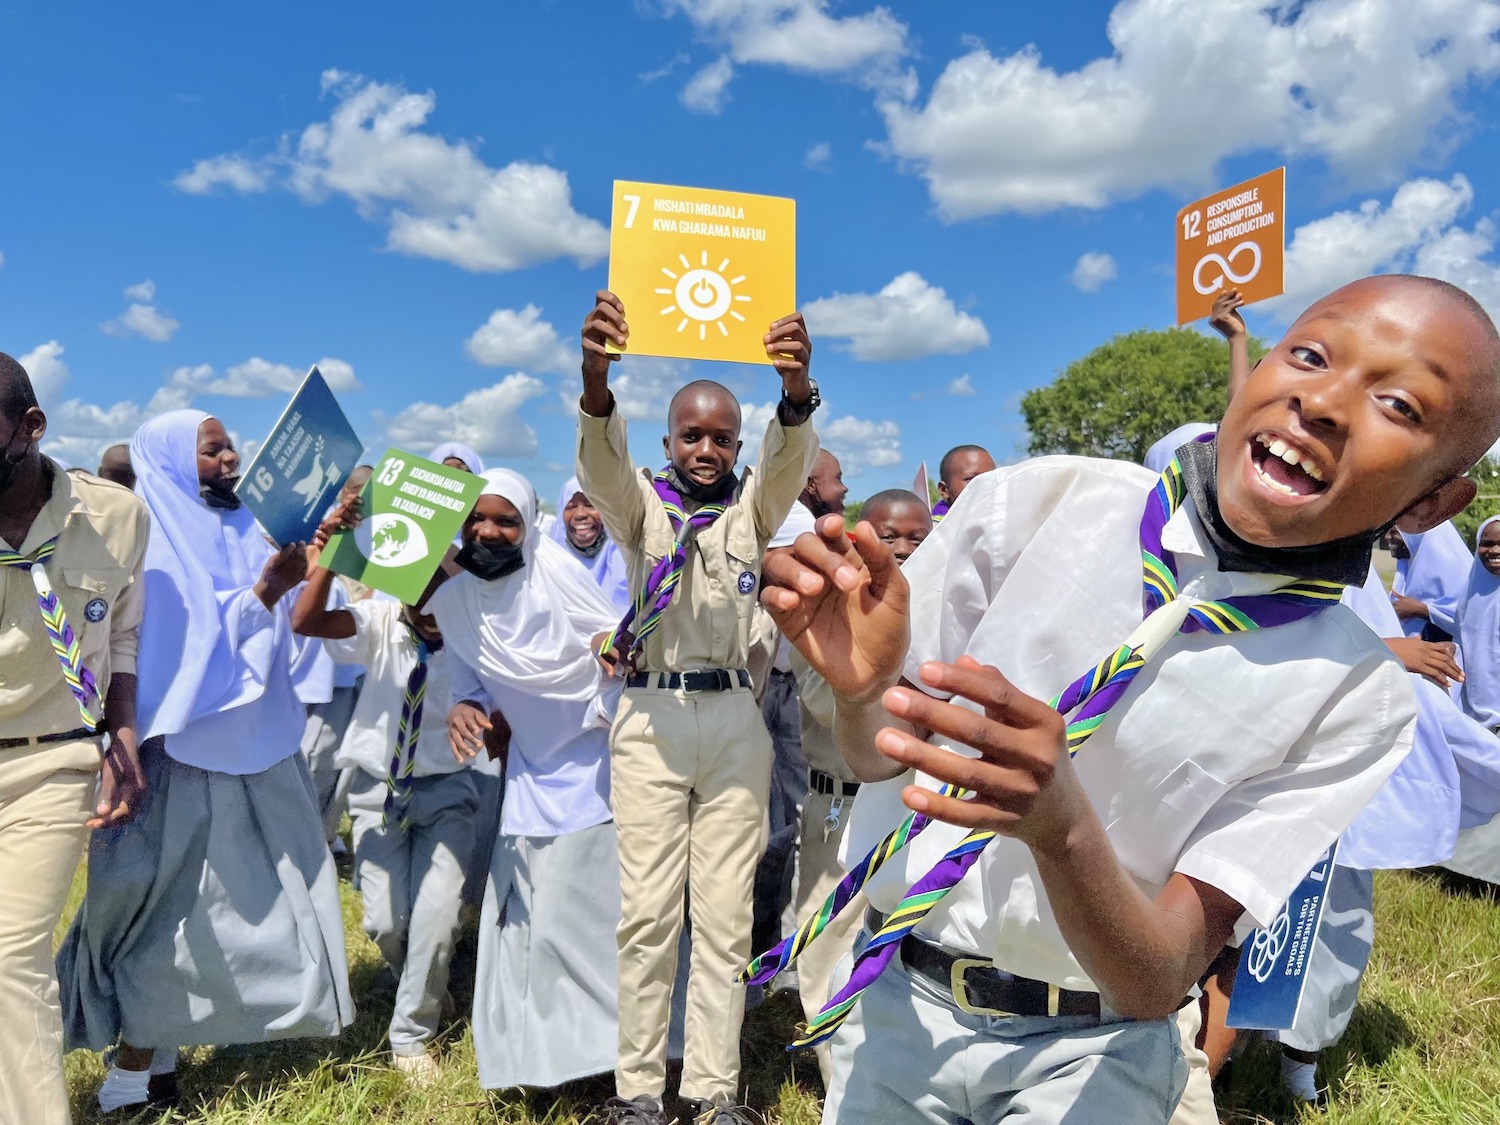 The Tanzania Scouts Association is one of several partners on the ground that make the #VijanaNaAmani255 project happen. (Photo credit: UNDP Tanzania)